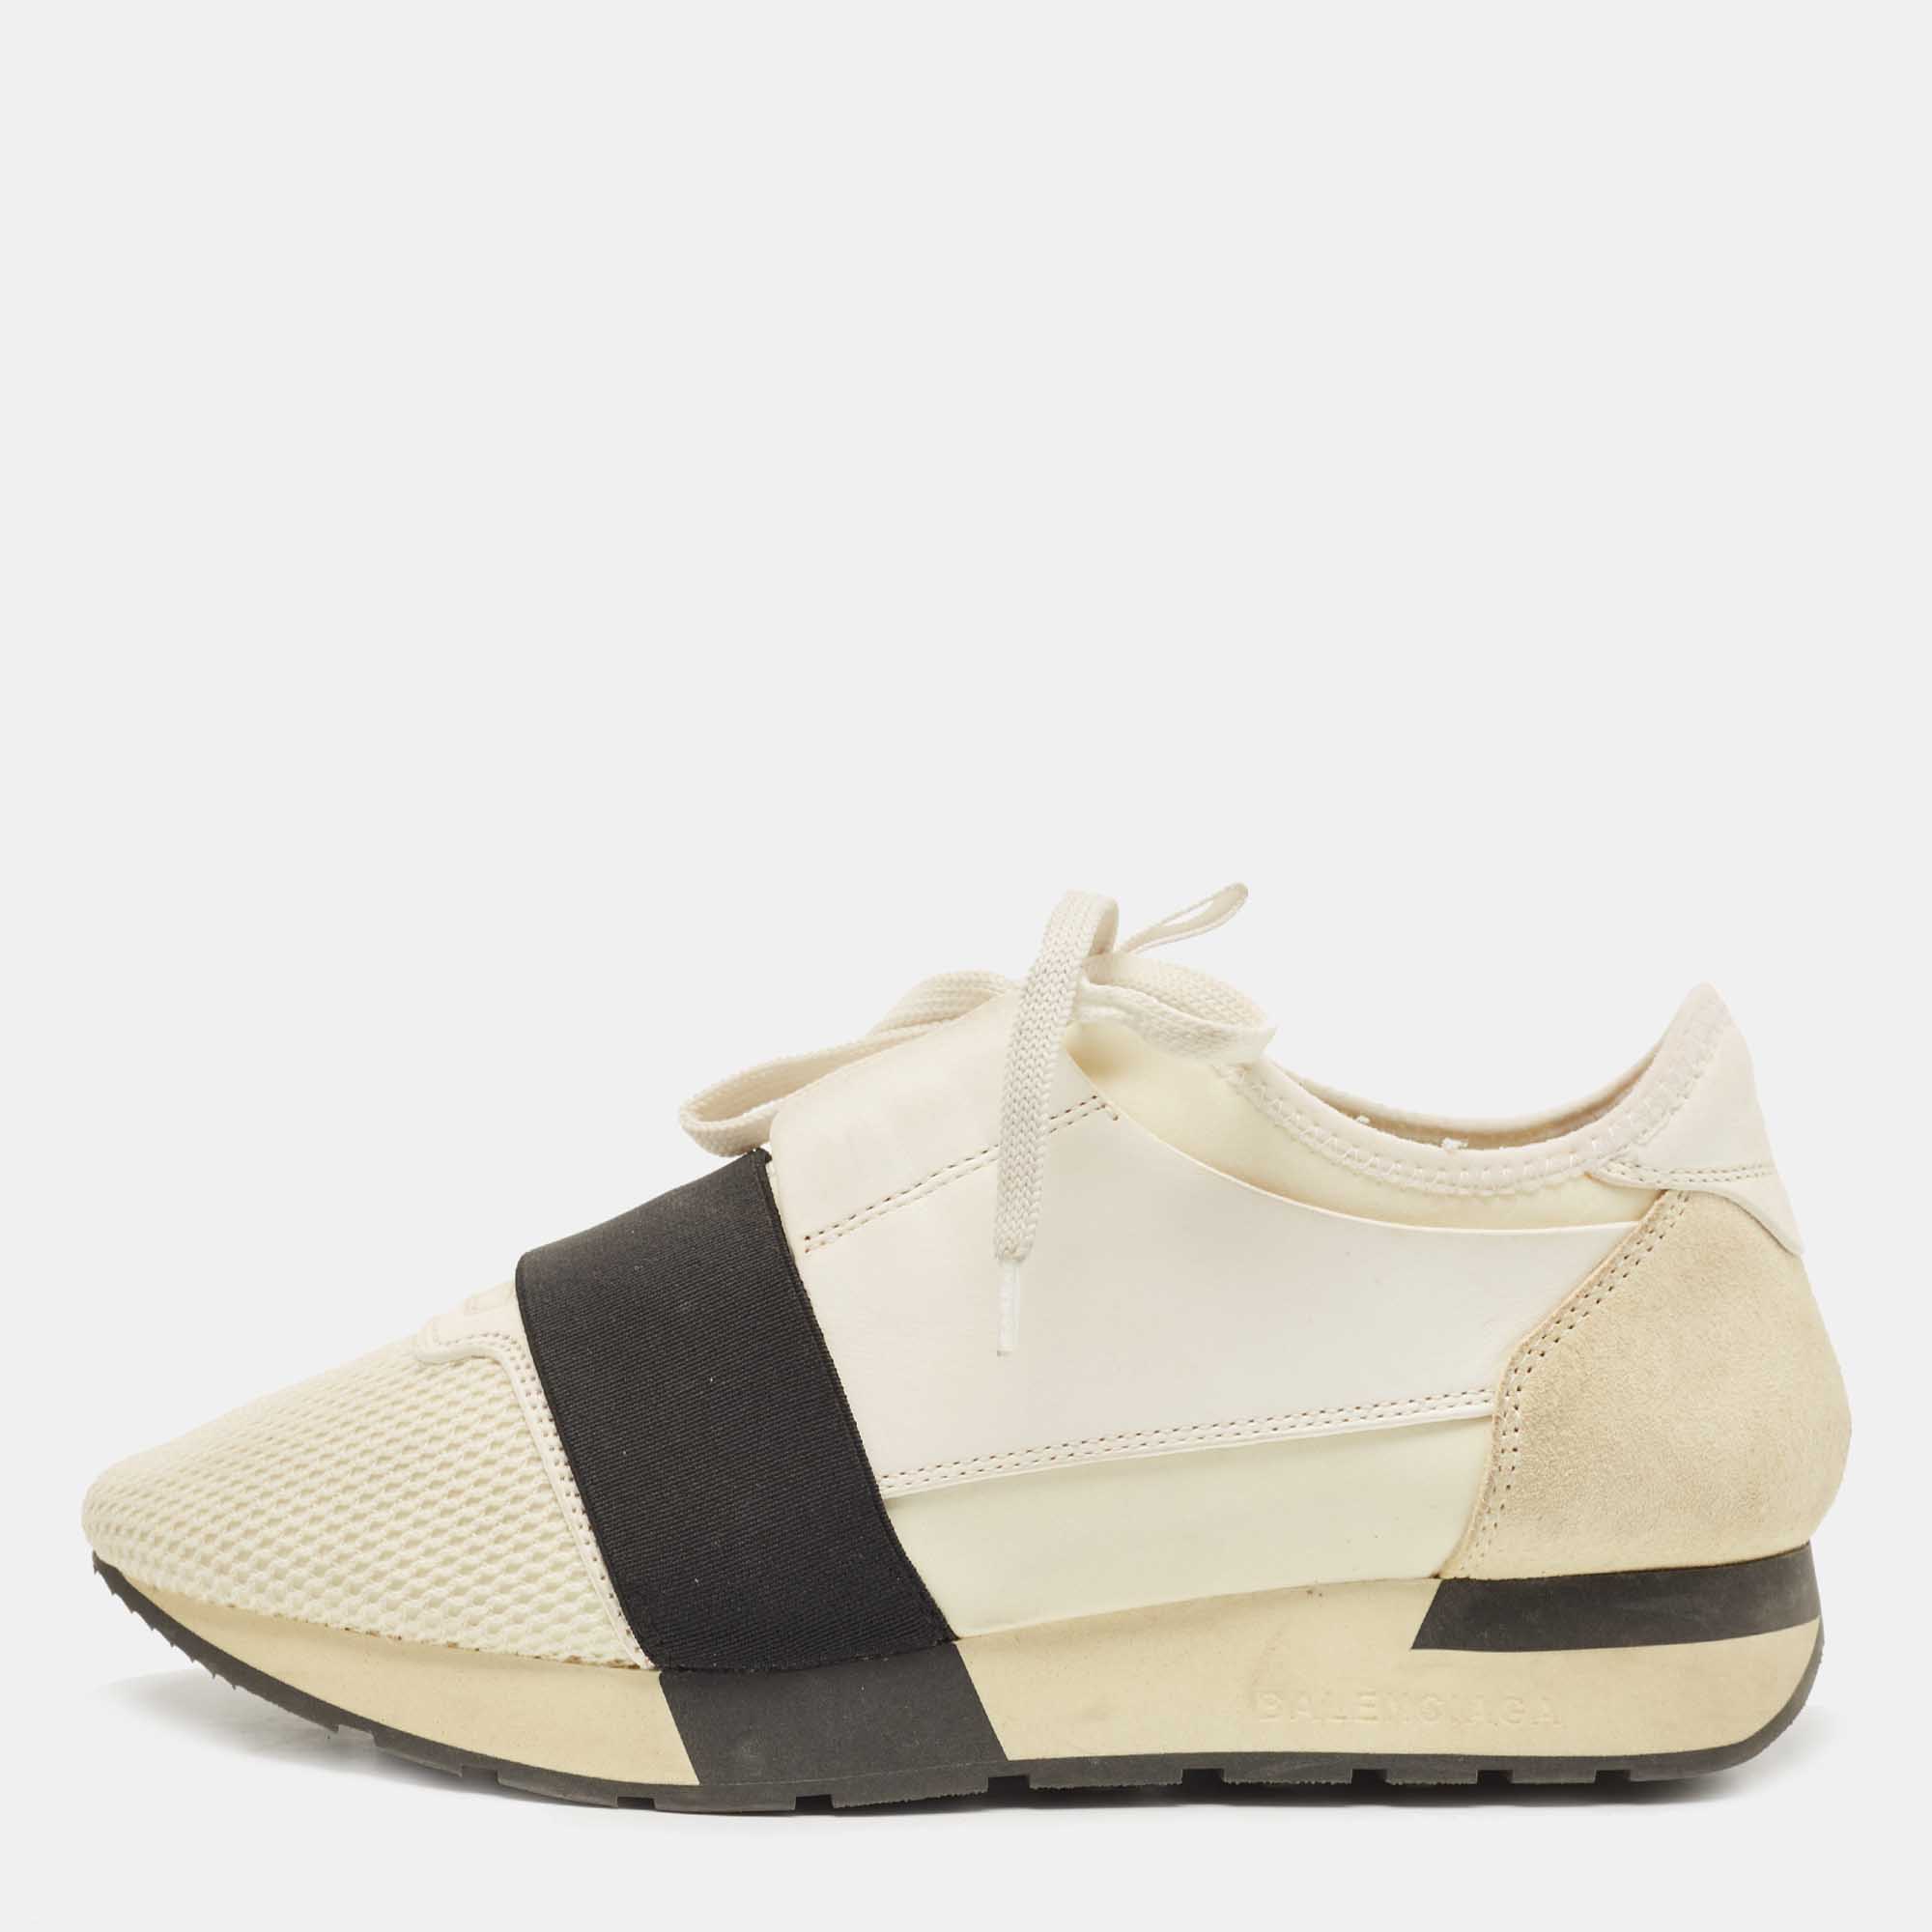 Coming in a classic silhouette these Balenciaga sneakers are a seamless combination of luxury comfort and style. These sneakers are designed with signature details and comfortable insoles.